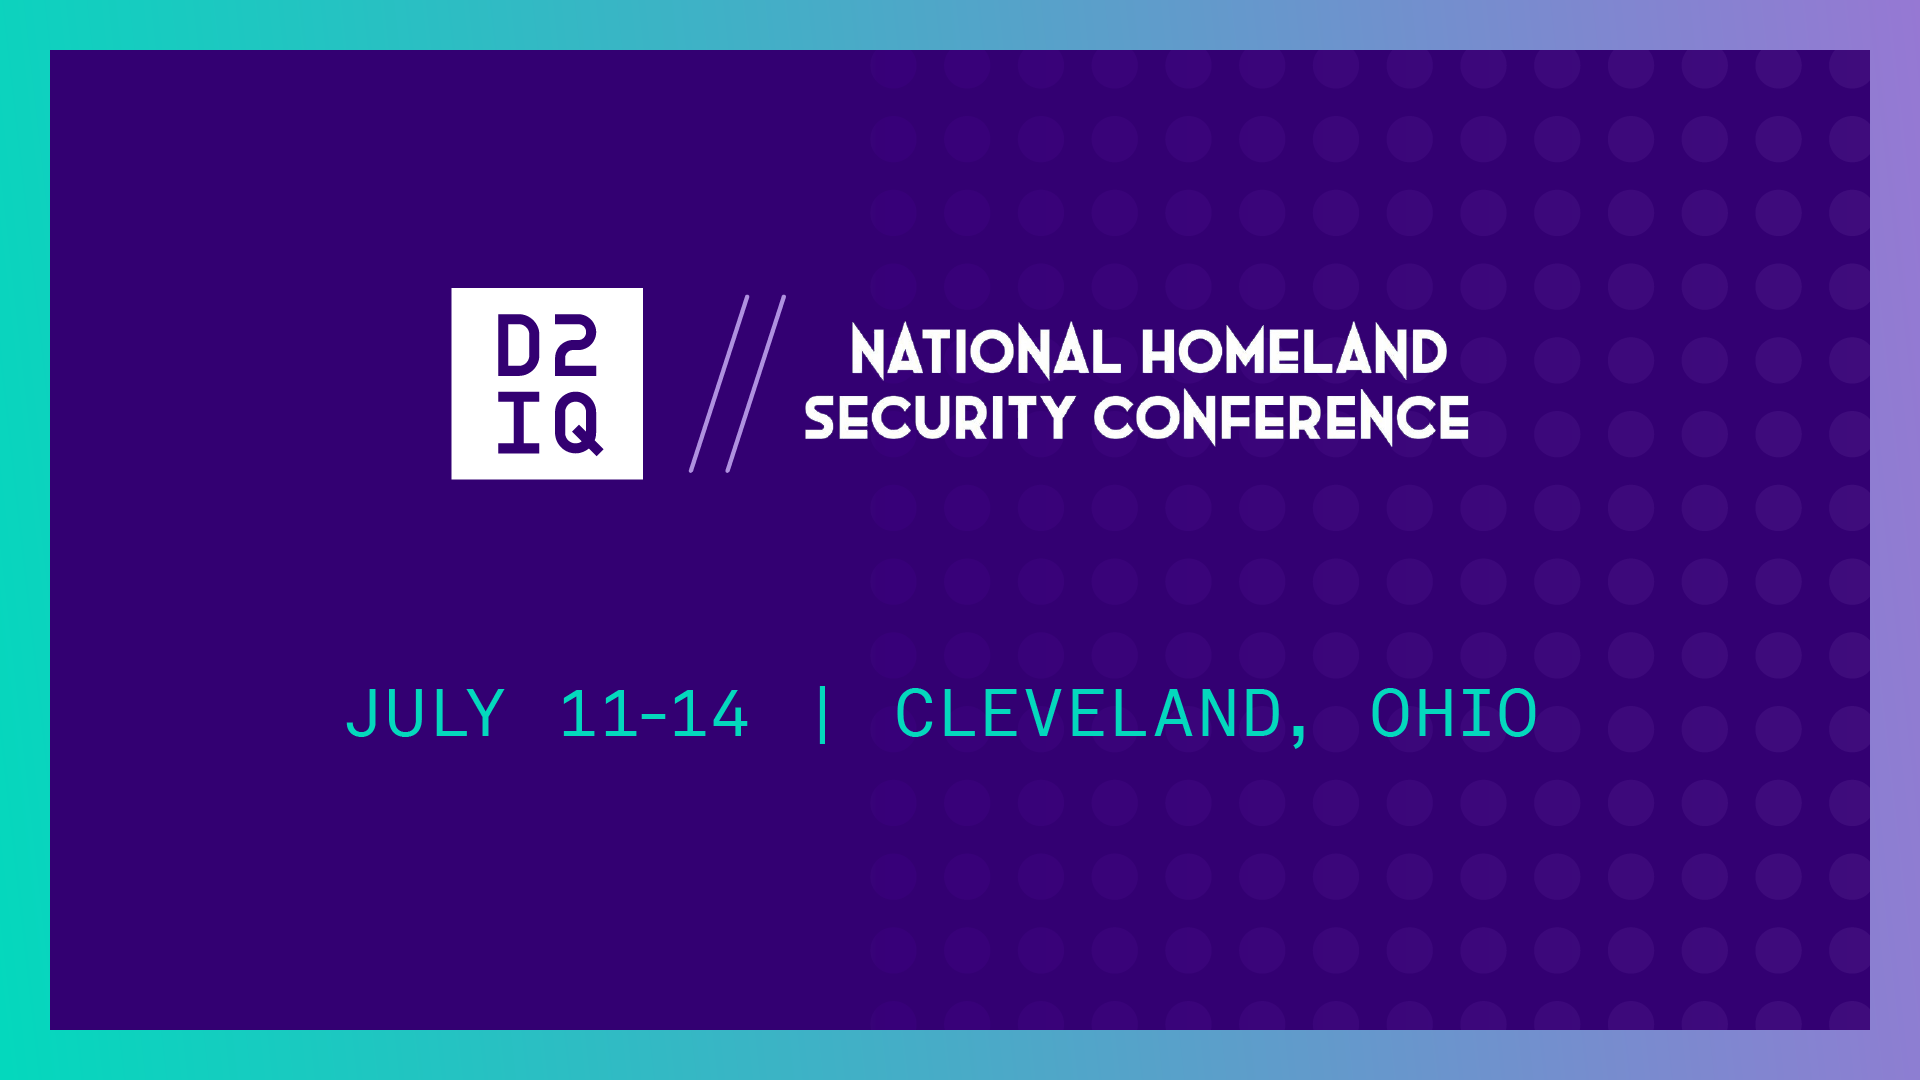 D2iQ + National Homeland Security Conference - Cleveland, Ohio